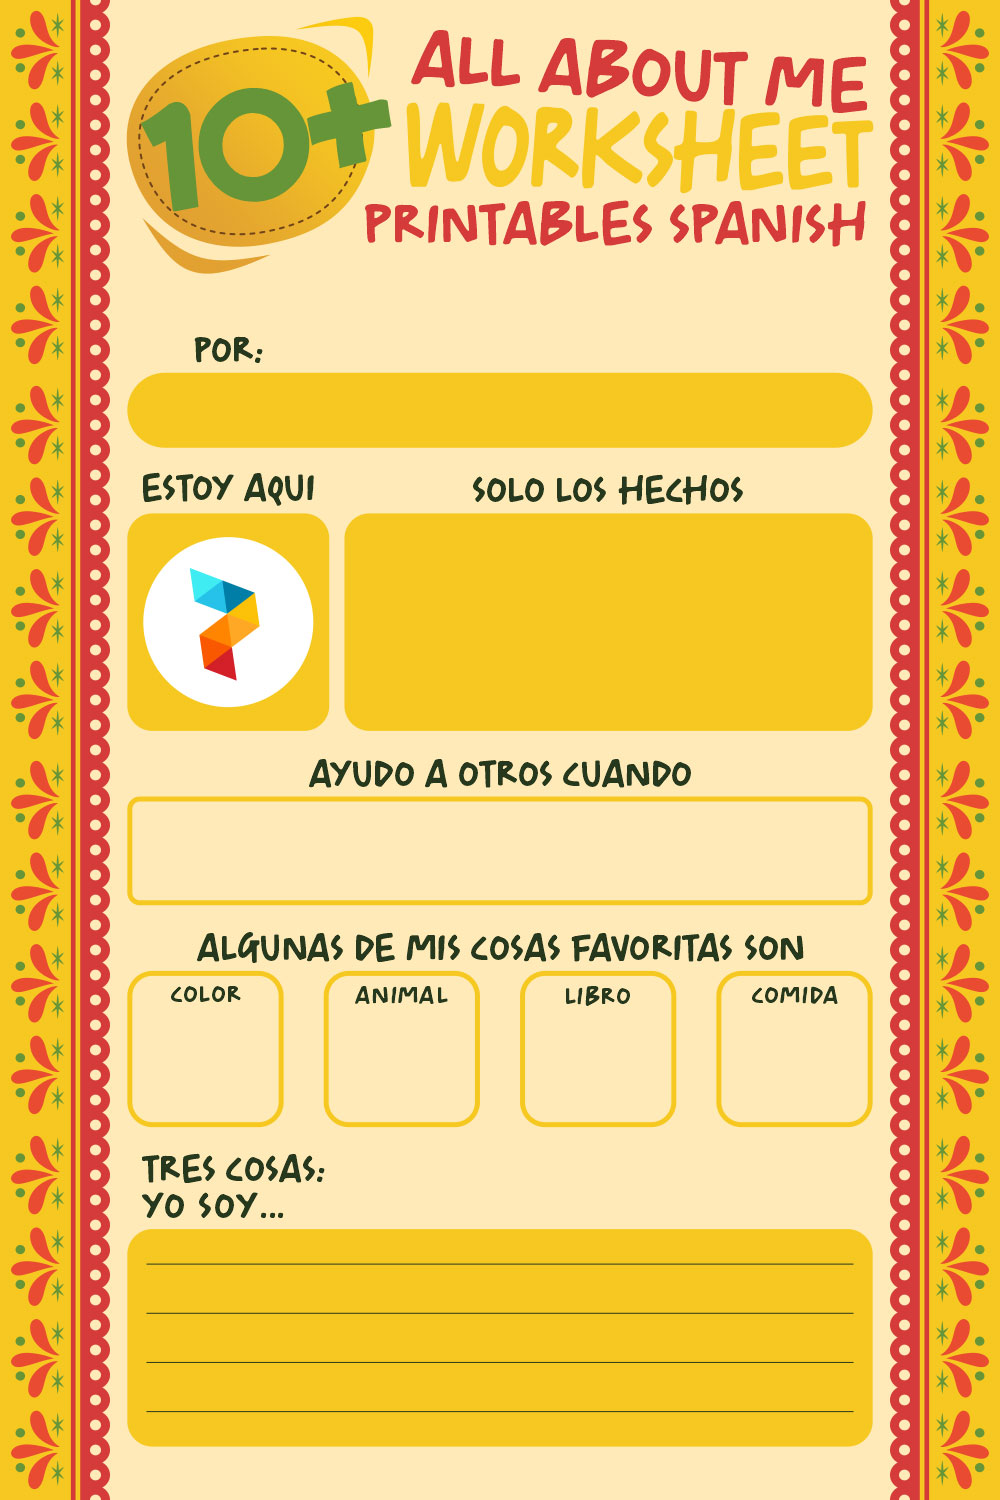 All About Me Worksheet Printables Spanish